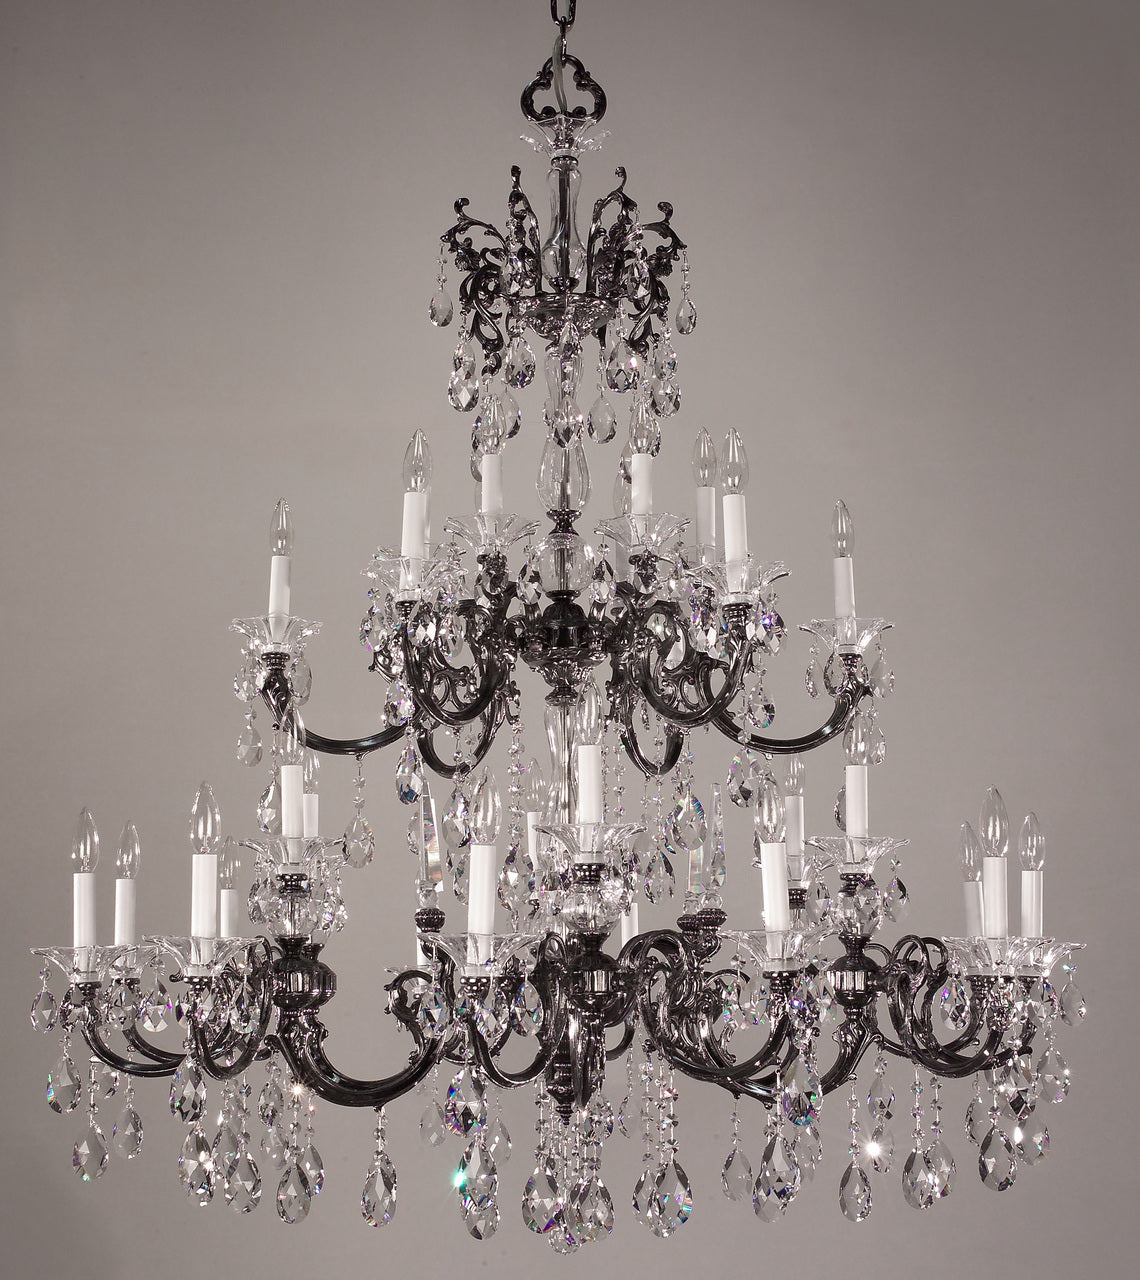 Classic Lighting 57060 EP SJT Via Lombardi Crystal Chandelier in Ebony Pearl (Imported from Spain)